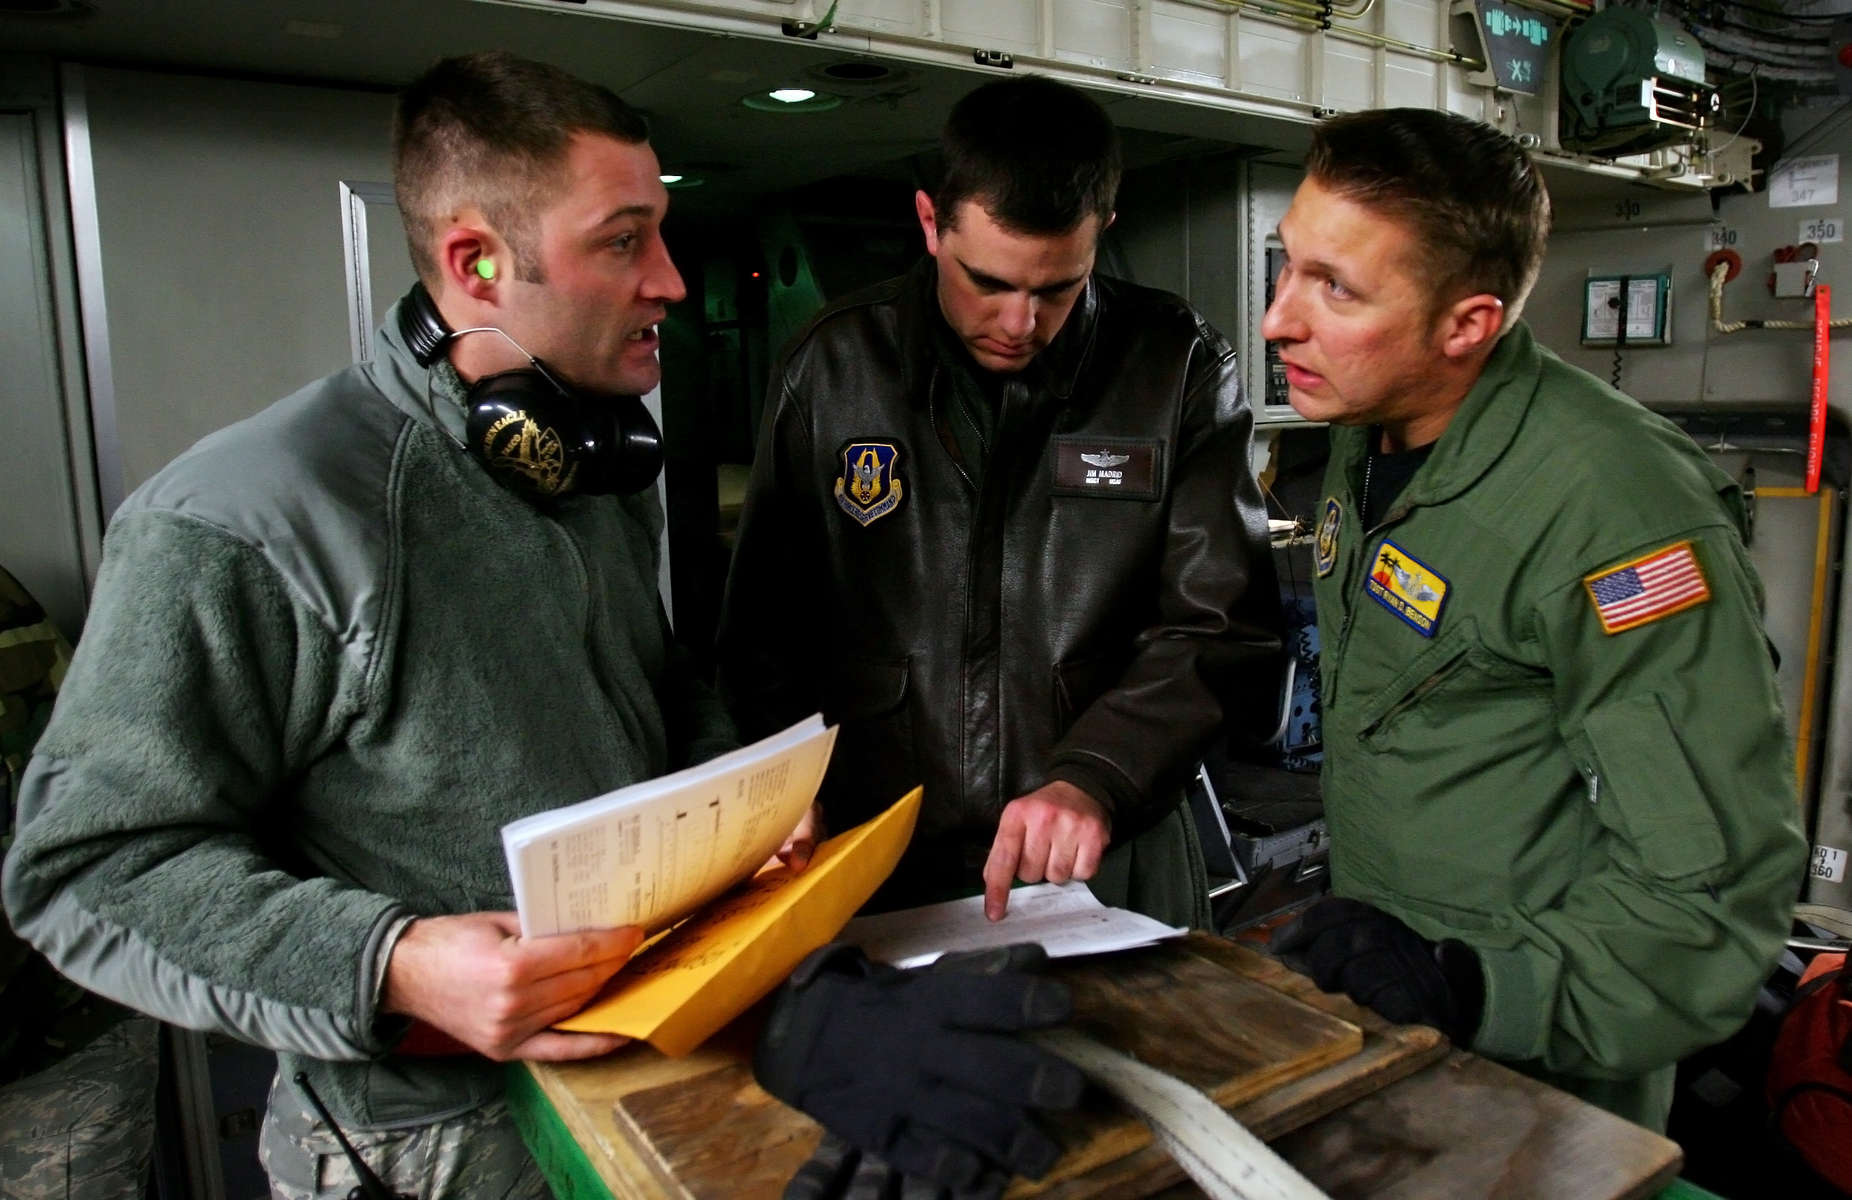 March Air Reserve Base C-17 aircrew Master Sgt. James, center, and Tech Sgt. Ryan Benson brief with Bill Taylor of McChord Air Force Base ground crew before loading humanitarian aid materials forHaiti after landing at McChord Air Force Base in Wash. (The Press-Enterprise/ Mark Zaleski)